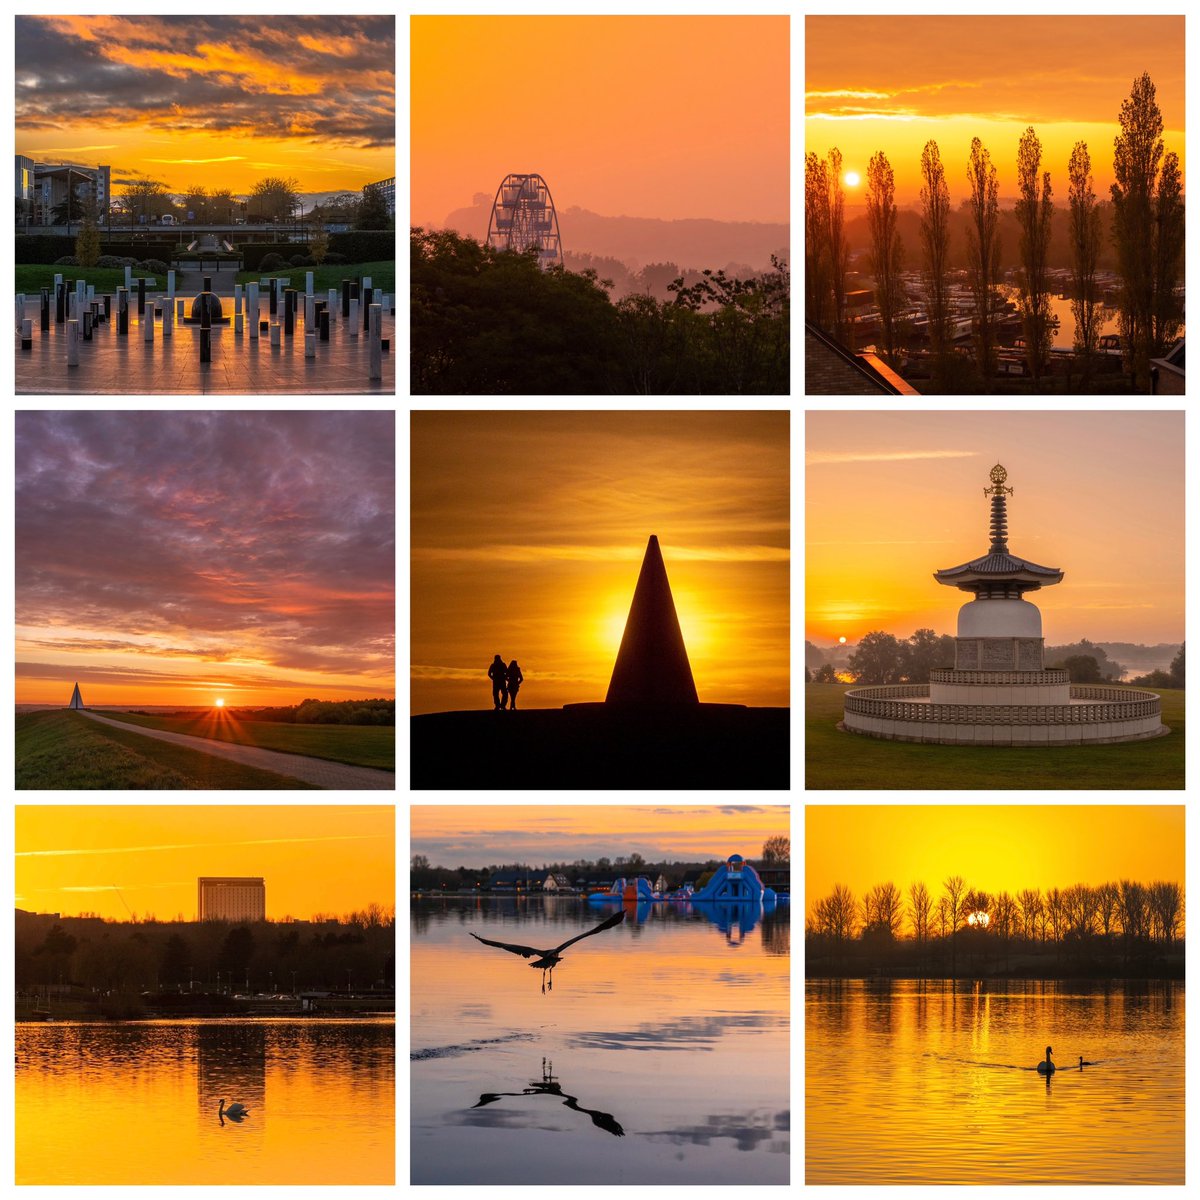 It’s hard to choose a ‘best nine’ from everything I’ve shot this year, but here’s a set of favourites of #MiltonKeynes to be going on with! Such a fabulous place for photography 😊 @scenesfromMK @DestinationMK @Hotel_LaTourMK @TheParksTrust @mkfuturenow #LoveMK